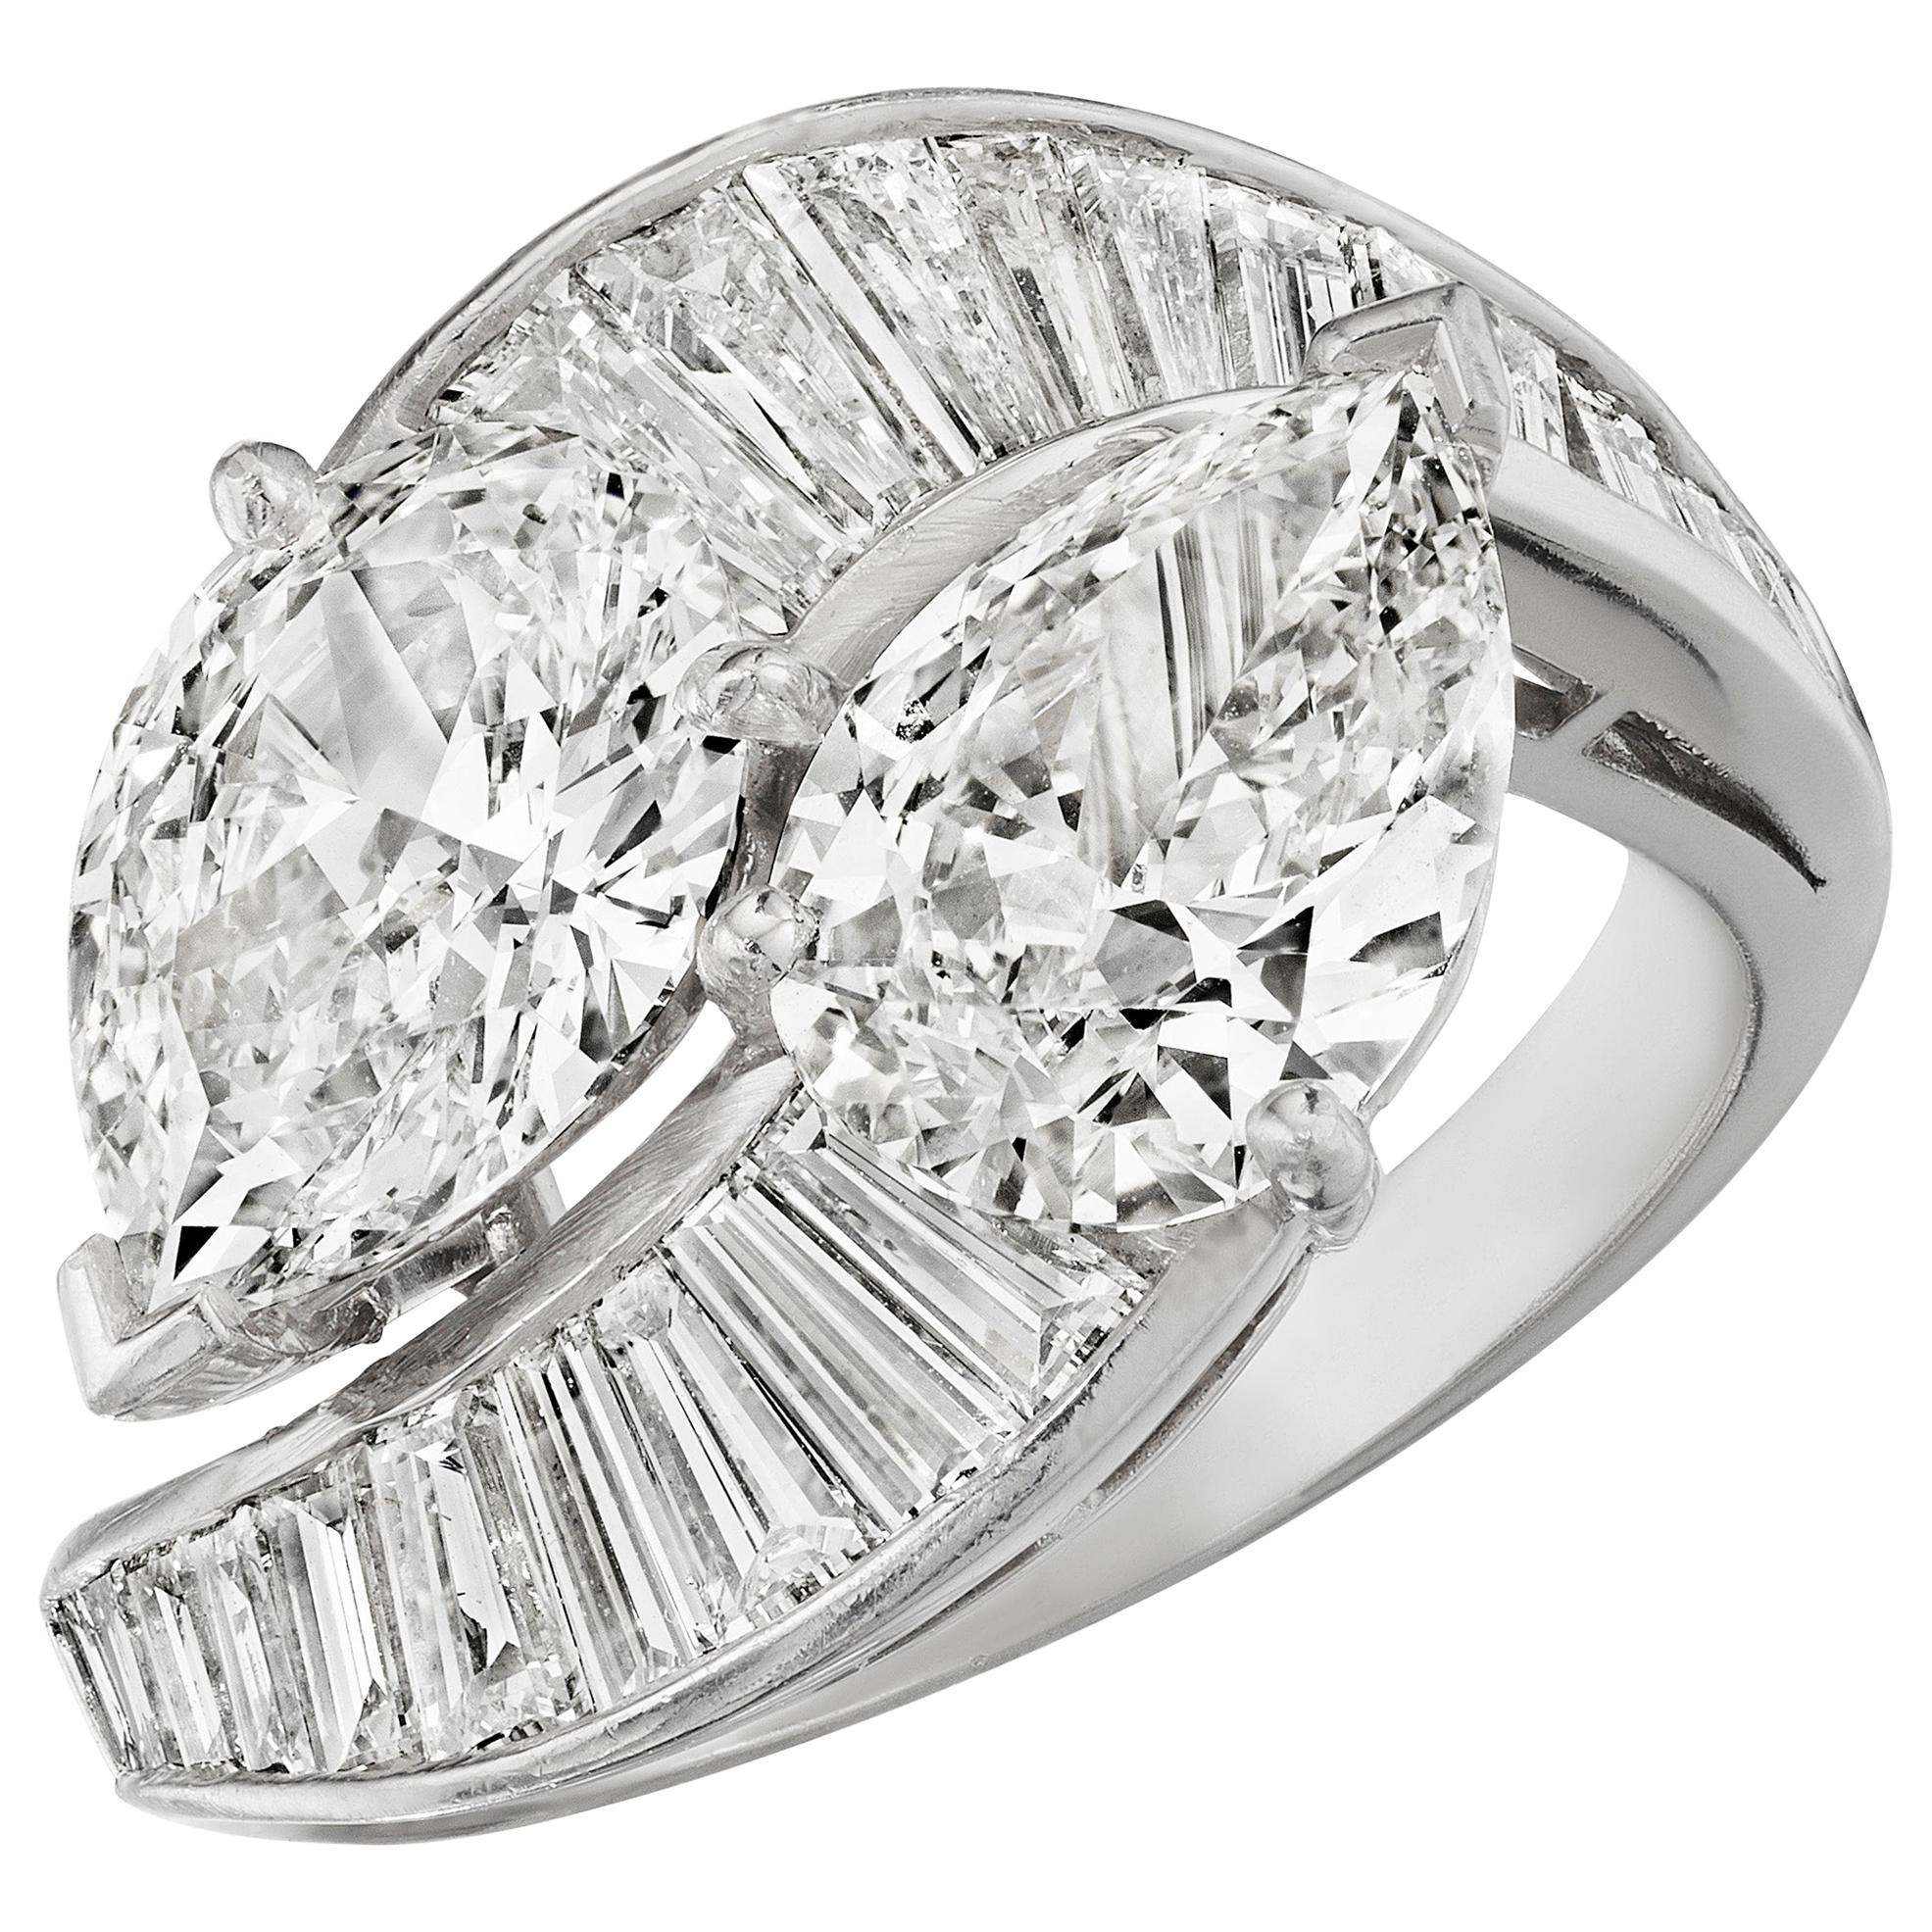 4.74 Carat 'total weight' Pear and Baguette Diamond "Bypass" Ring in Platinum